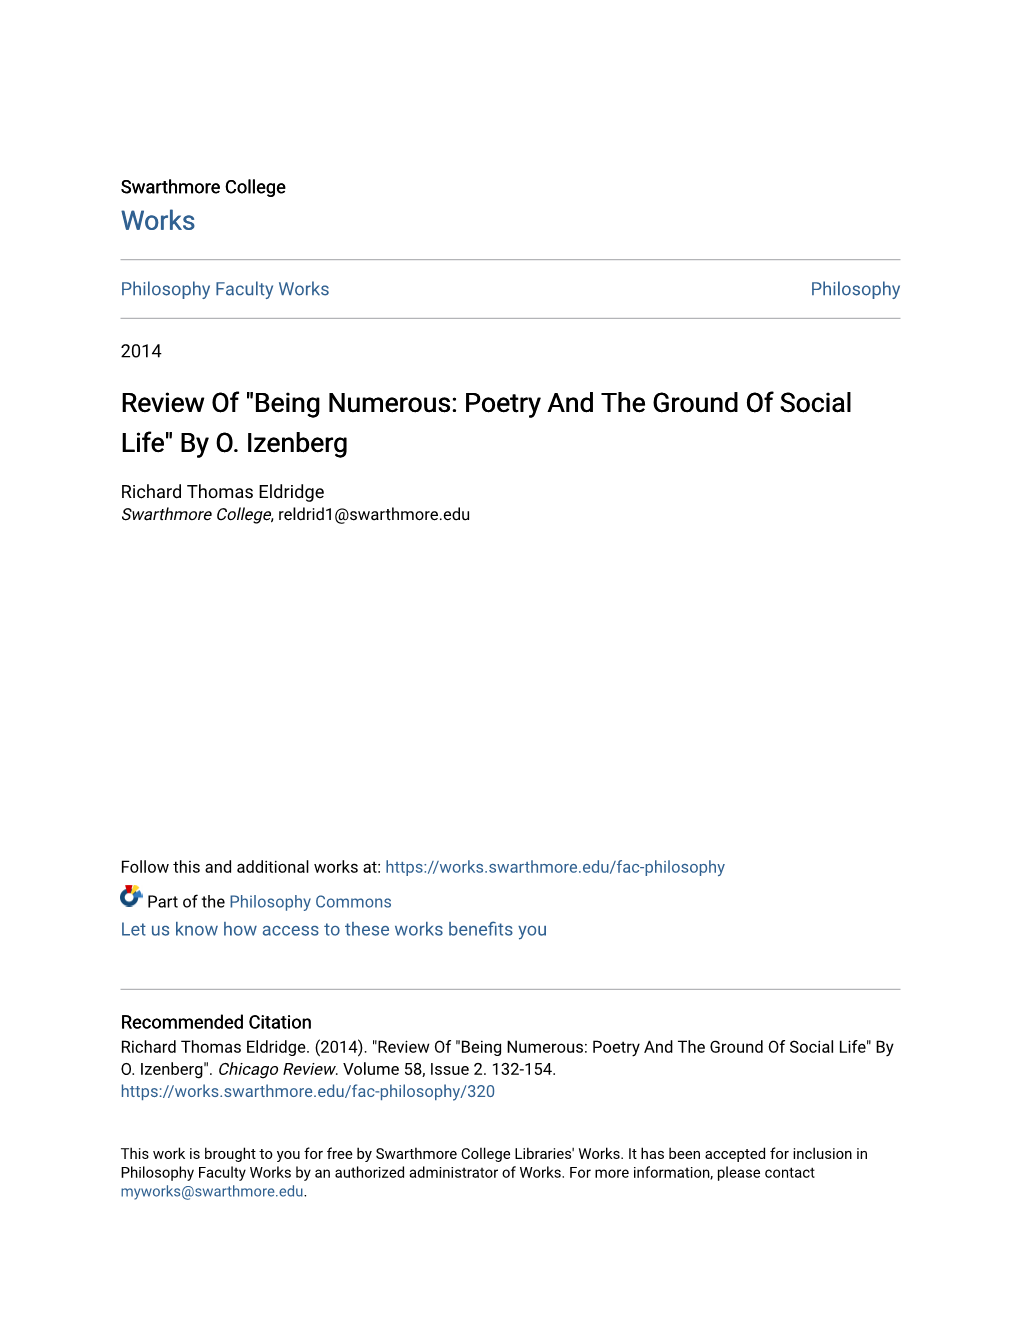 Review Of" Being Numerous: Poetry and the Ground of Social Life" By